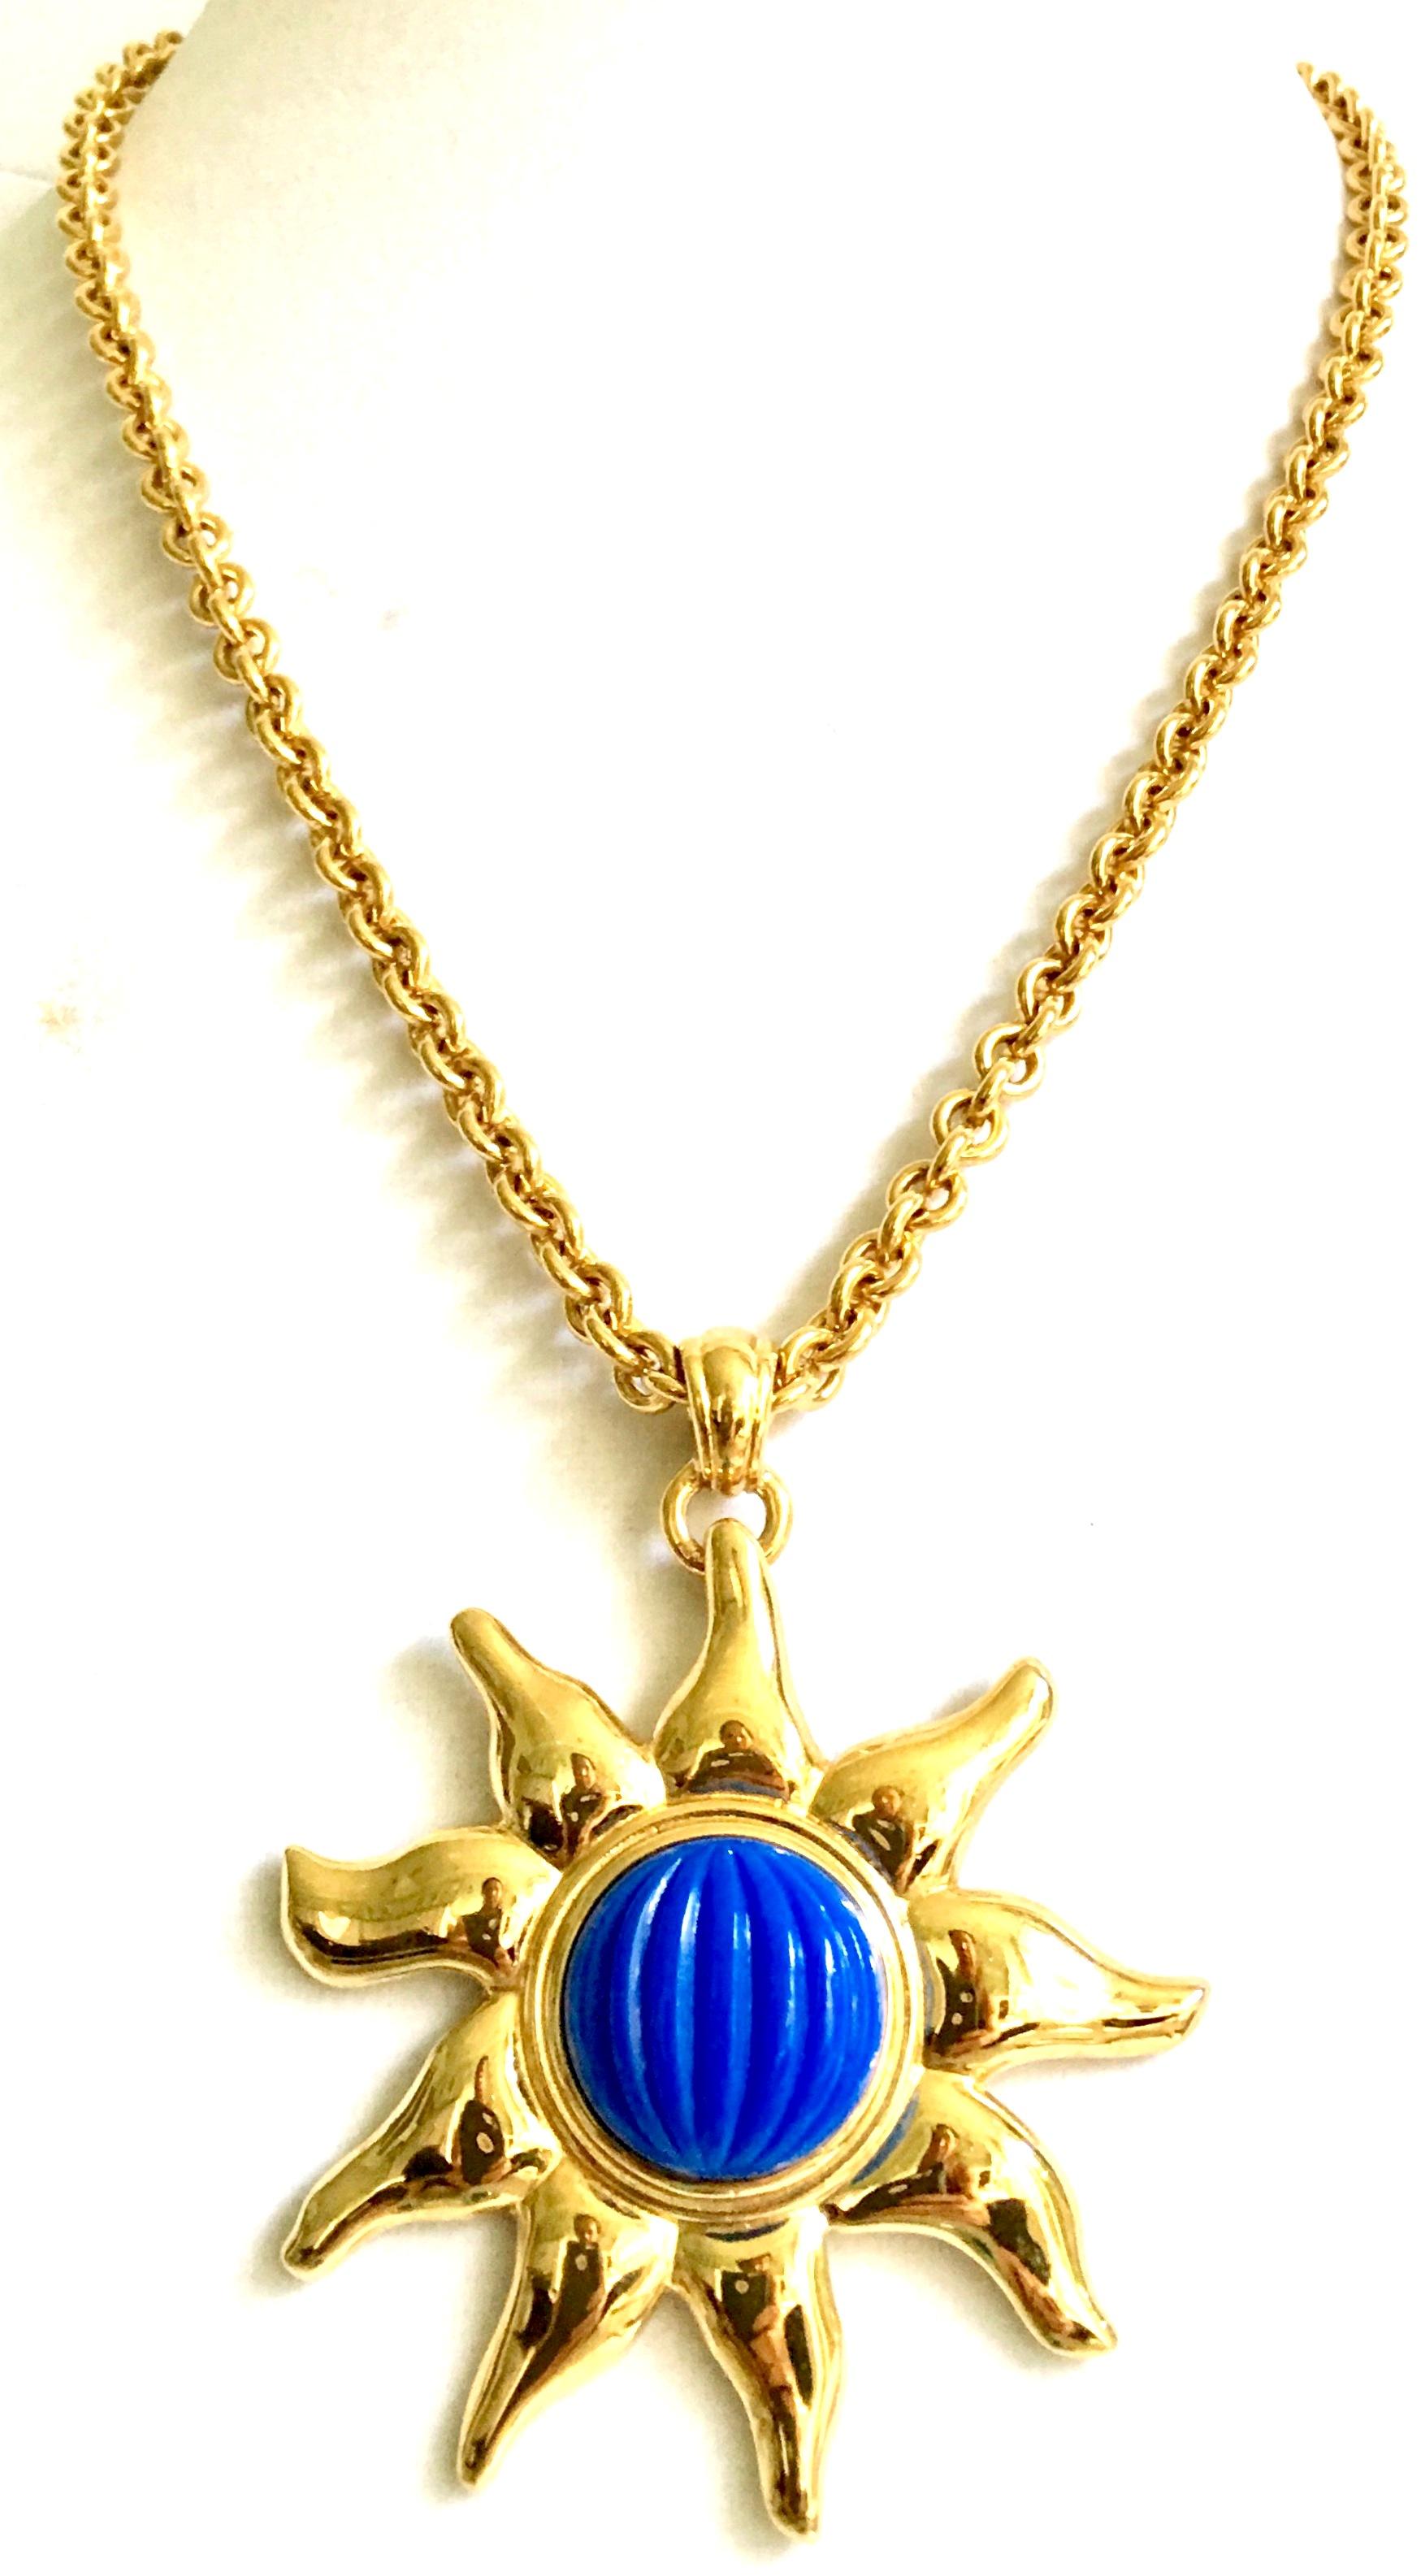 1980'S Gold Plate & Faux Blue Lapis Starburst Pendant Chain Link Necklace By, Monet. Features a gold plate chain link long locking claw style clasp necklace and large faux blue central stone gold starburst pendant.
Pendant is approximately, 3